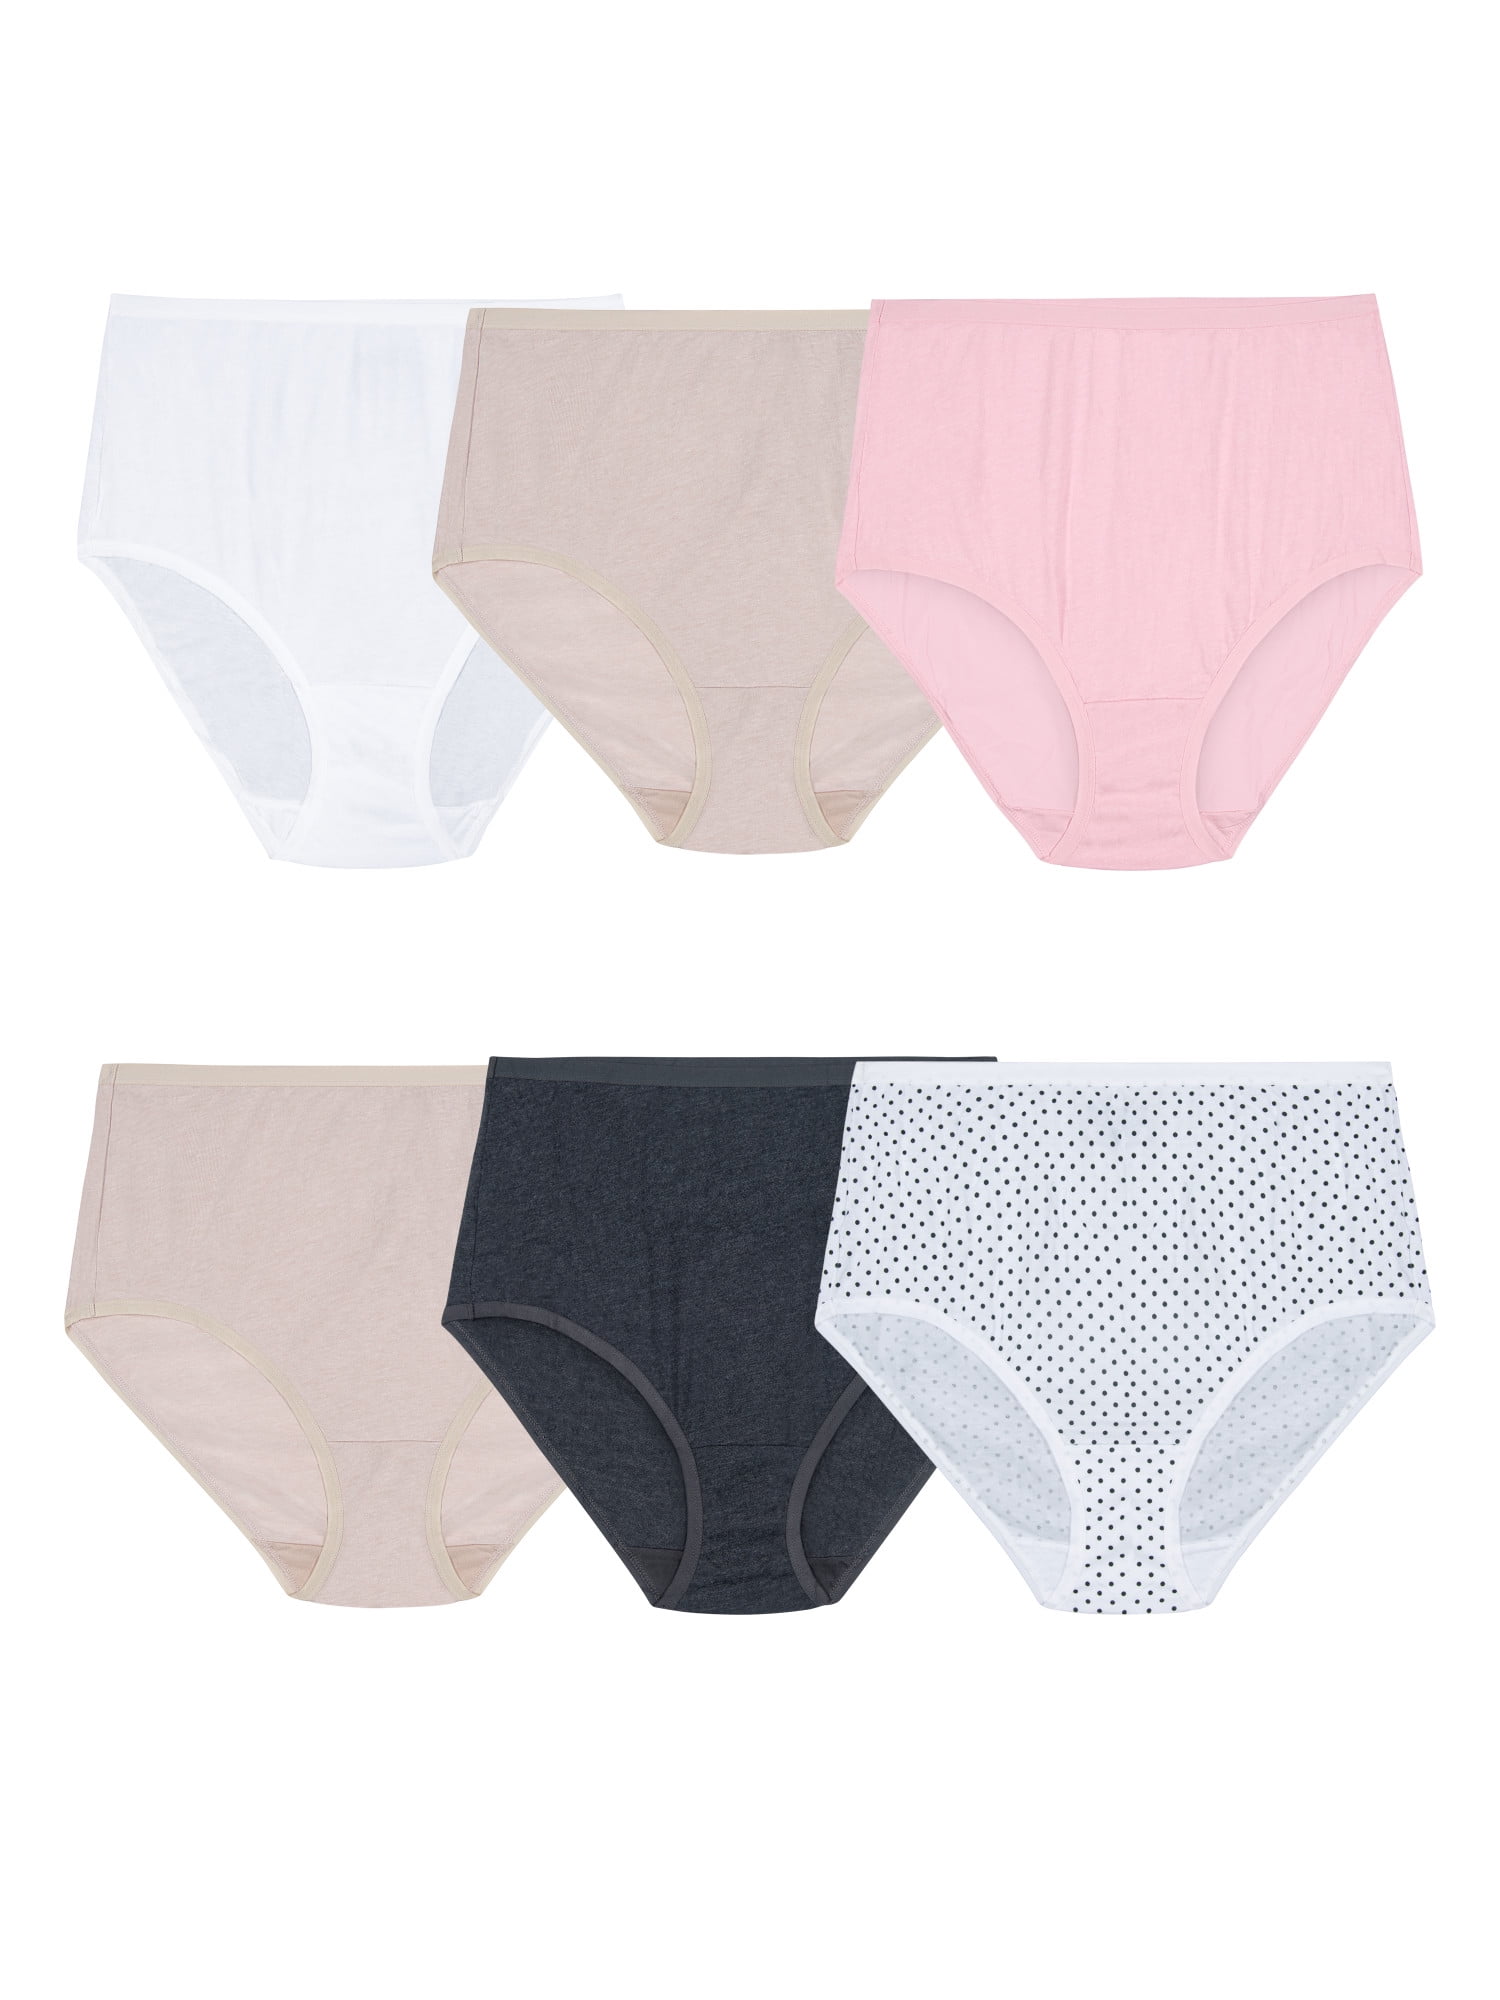 Fruit of the Loom Women's Premium Ultra Soft Brief Panty, 6 Pack, Sizes ...